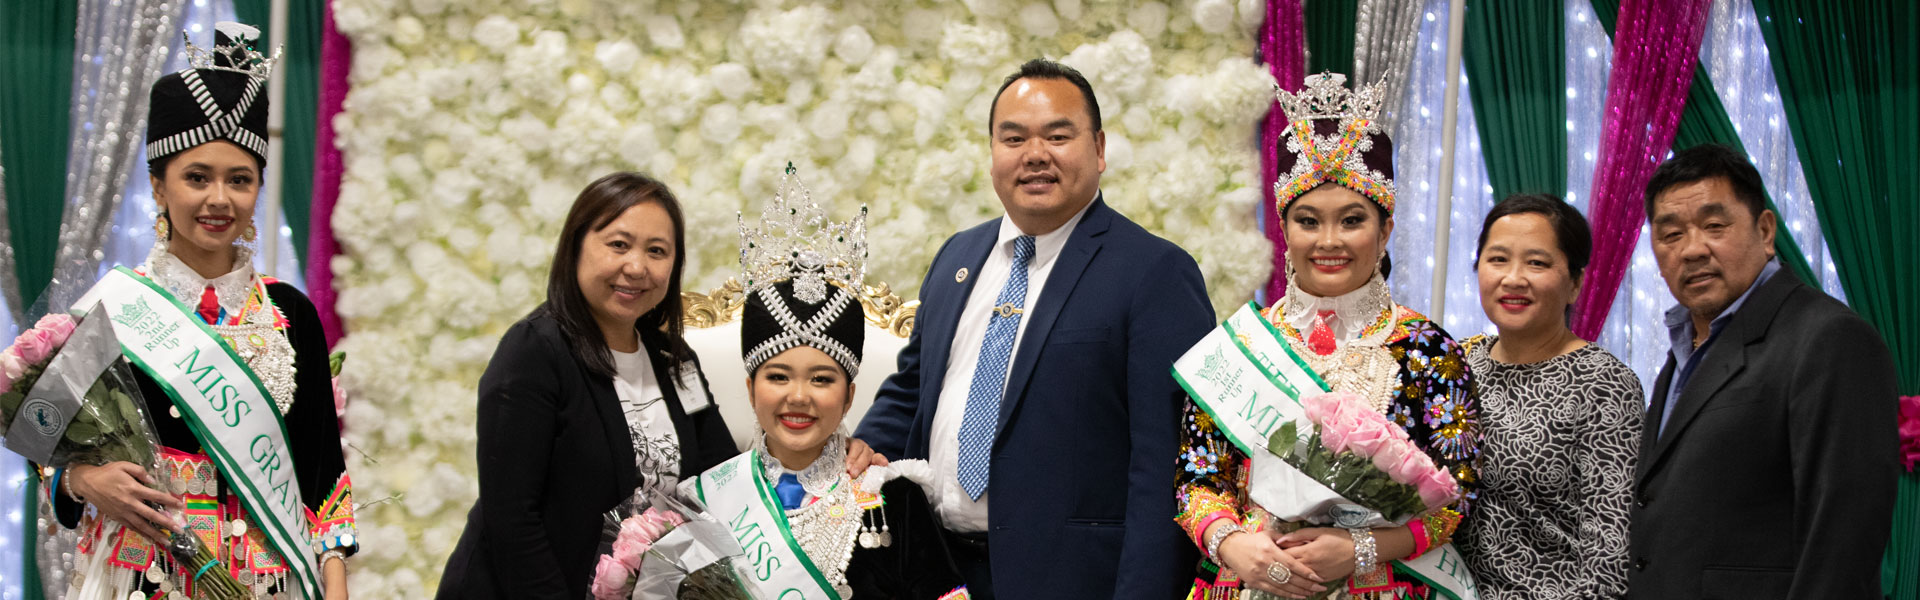 Pagent winner of Hmong New Year